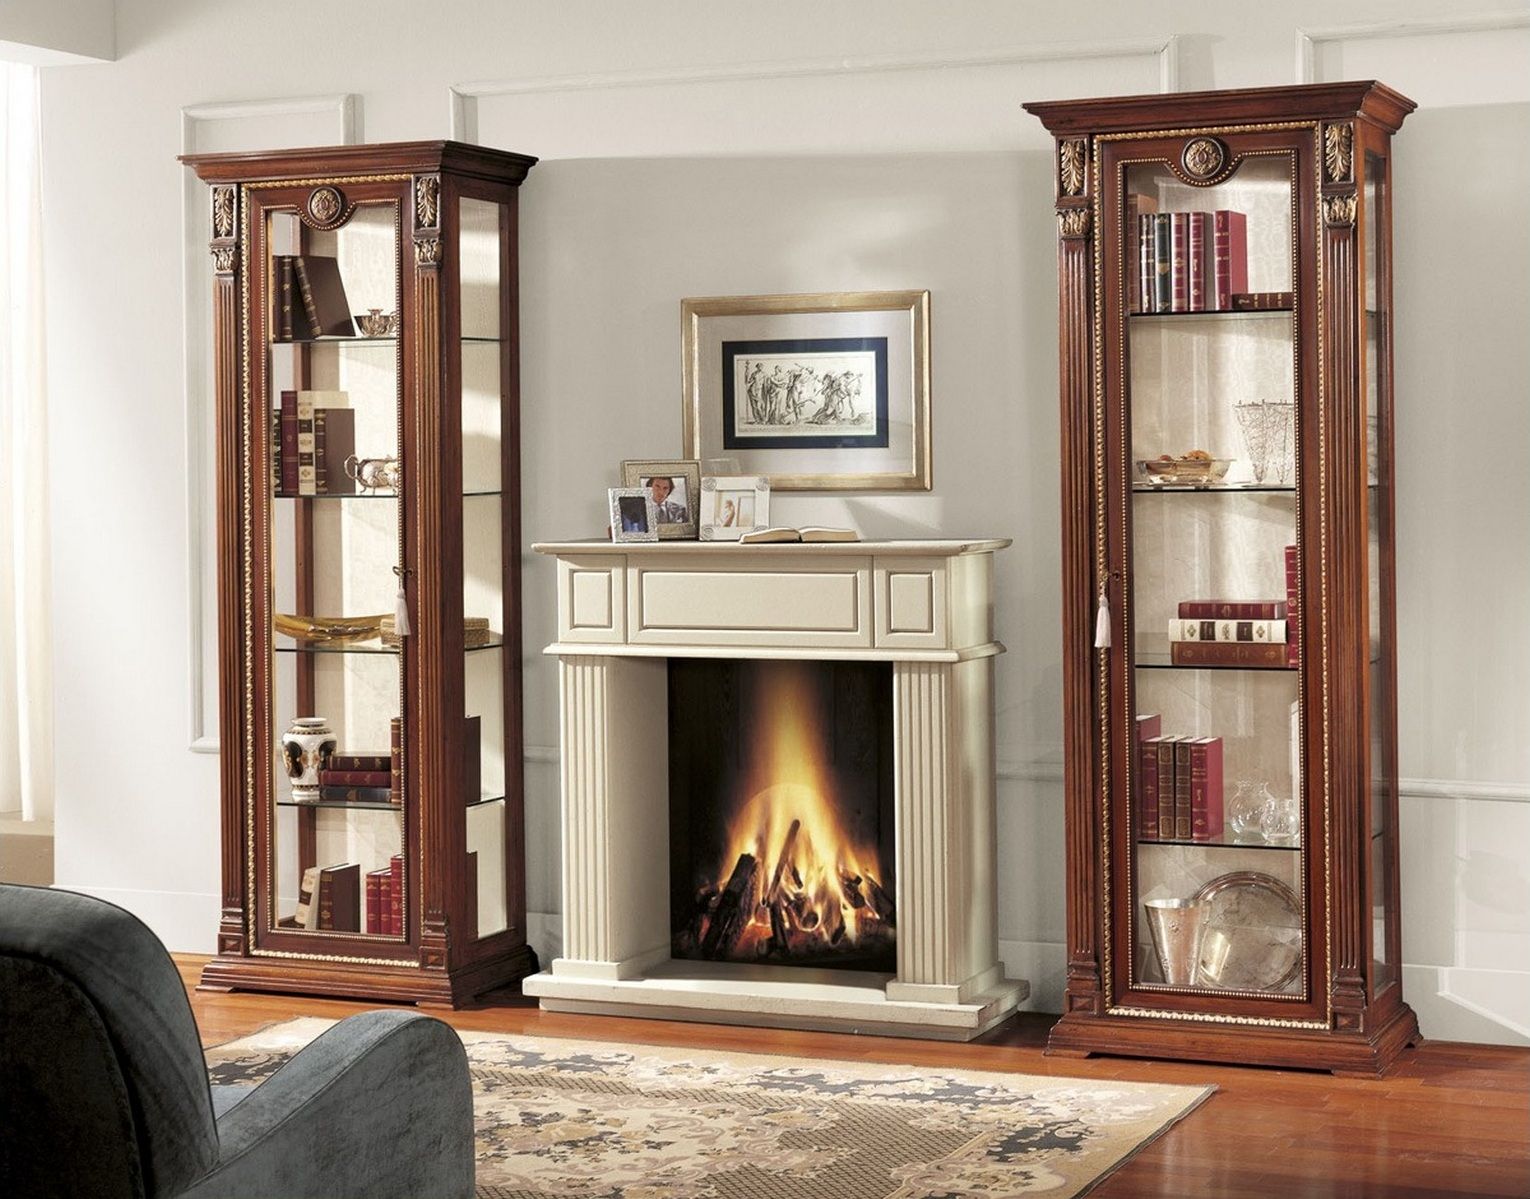 Fireplace Surround Cabinets Lovely Wood Display Lighted Corner Curio Cabinet with Glass Doors